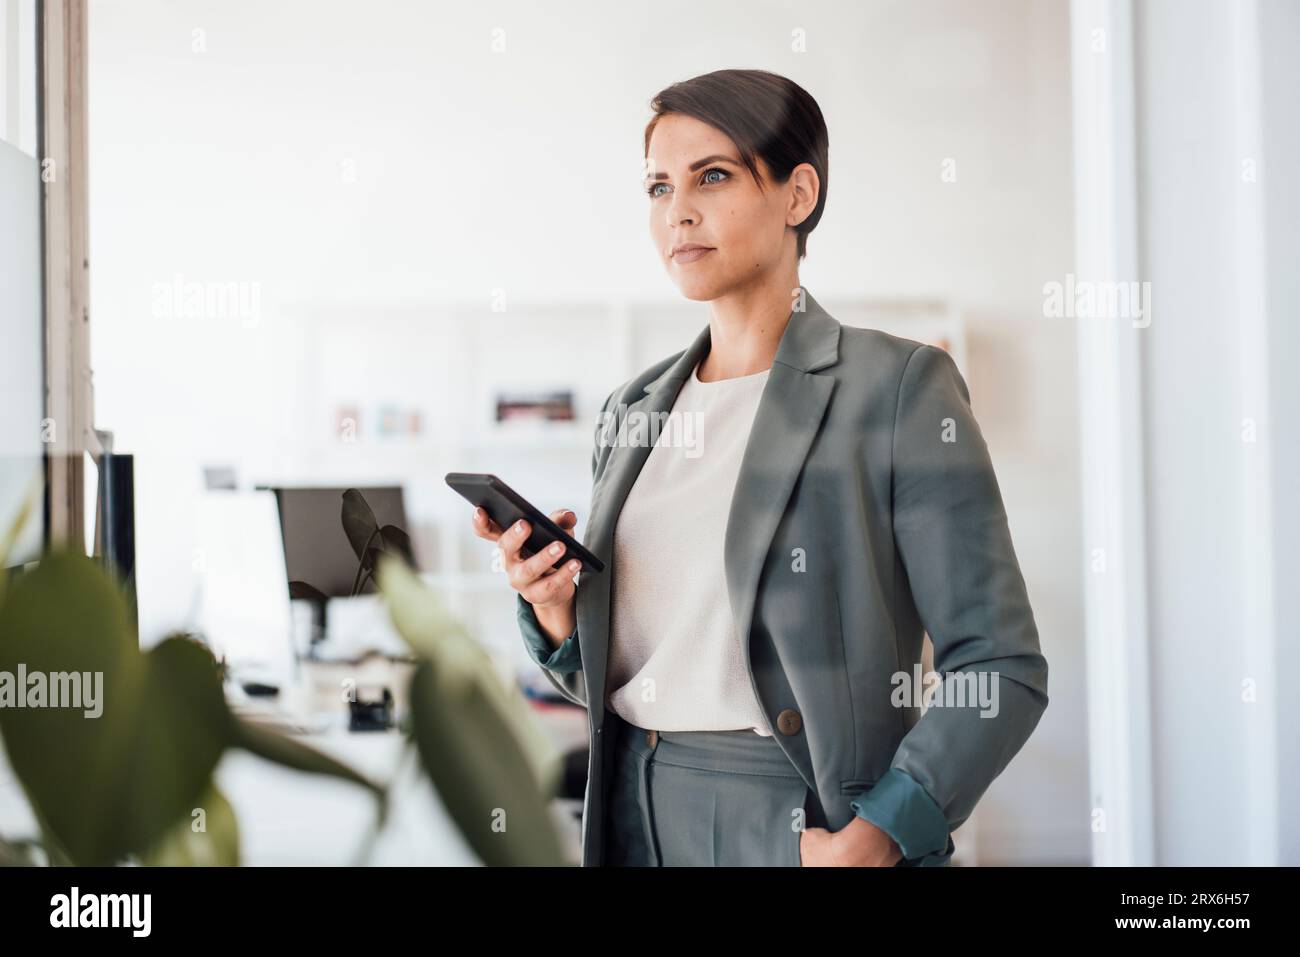 Confident businesswoman with smart phone in office Stock Photo